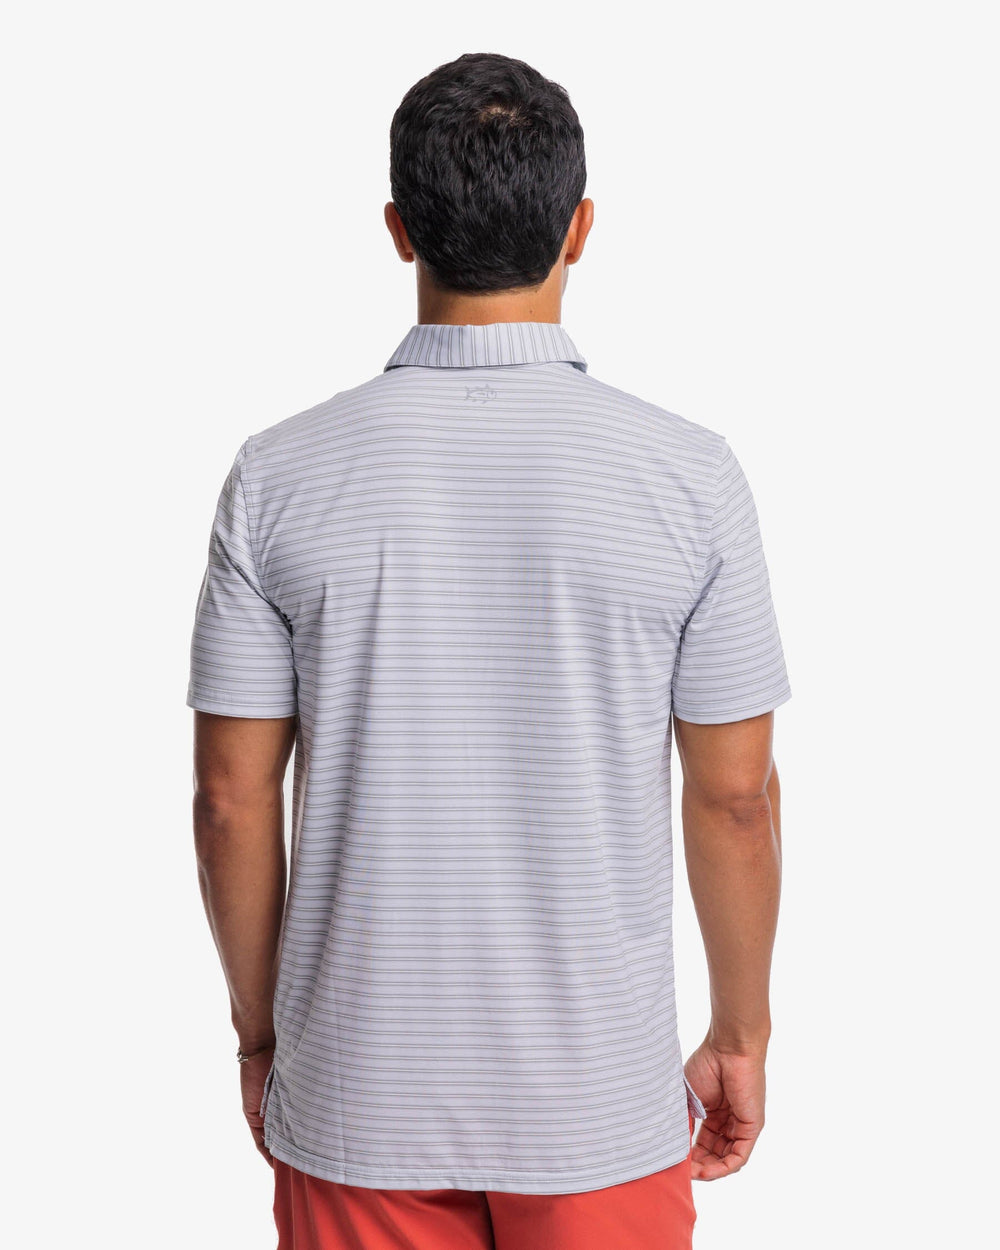 The back view of the Southern Tide Brrreeze Crawford Stripe Performance Polo Shirt by Southern Tide - Slate Grey